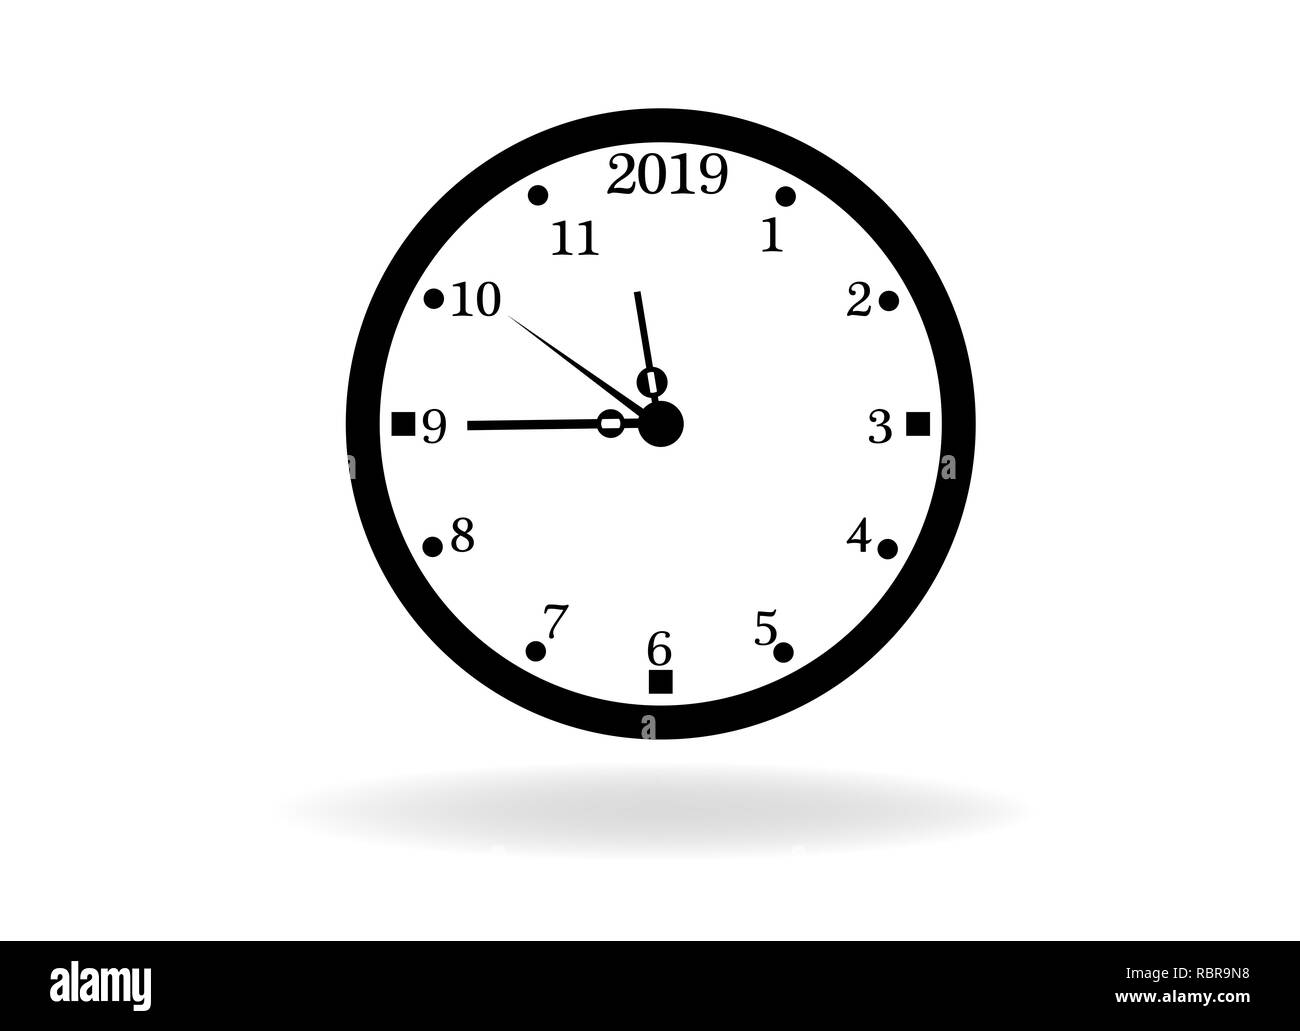 2019 time clock concept isolated on white background Stock Photo